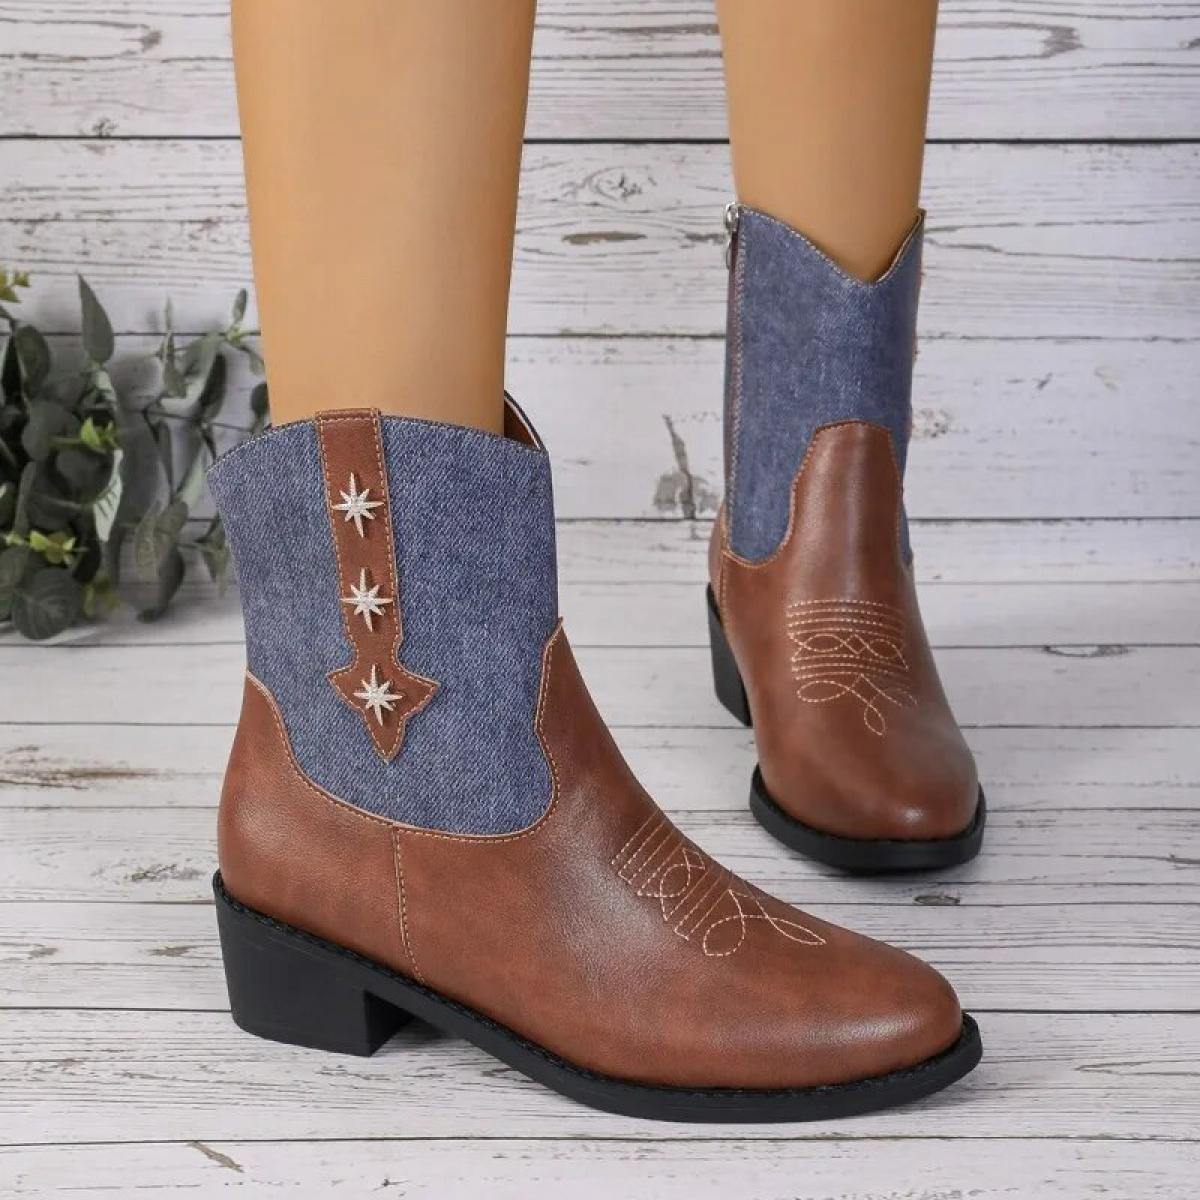 Cowboy Short Boots For Women Cowgirl Fashion Western Boots Women Embroidered Casual Square Toe Shoes